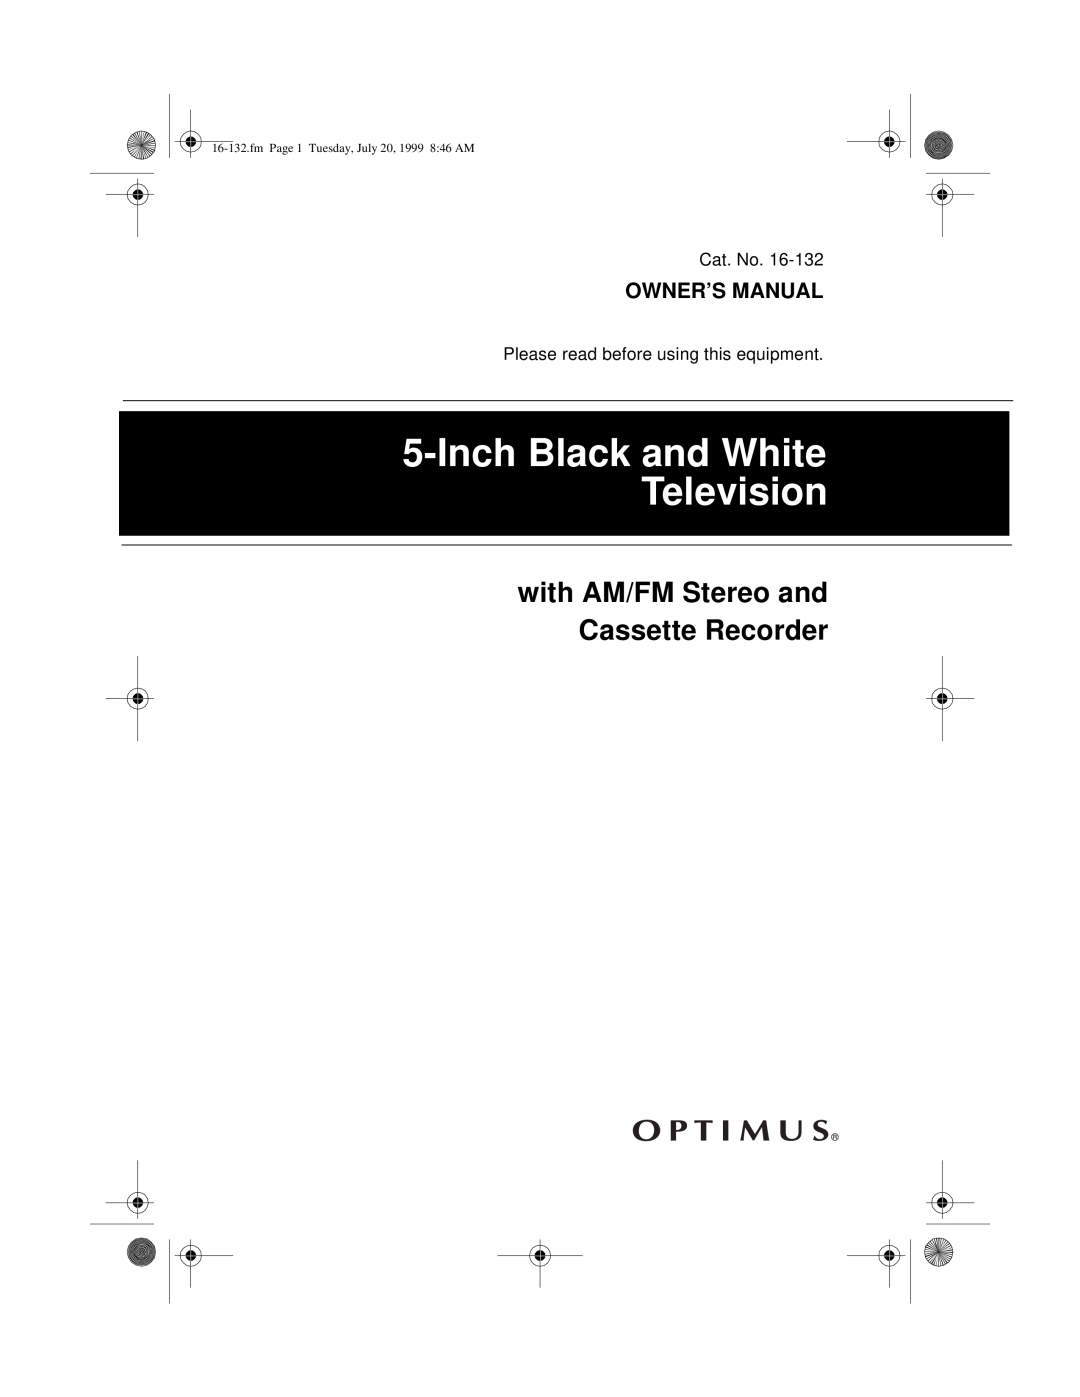 Optimus 16-132 owner manual with AM/FM Stereo and Cassette Recorder, Owner’S Manual, Inch Black and White Television 